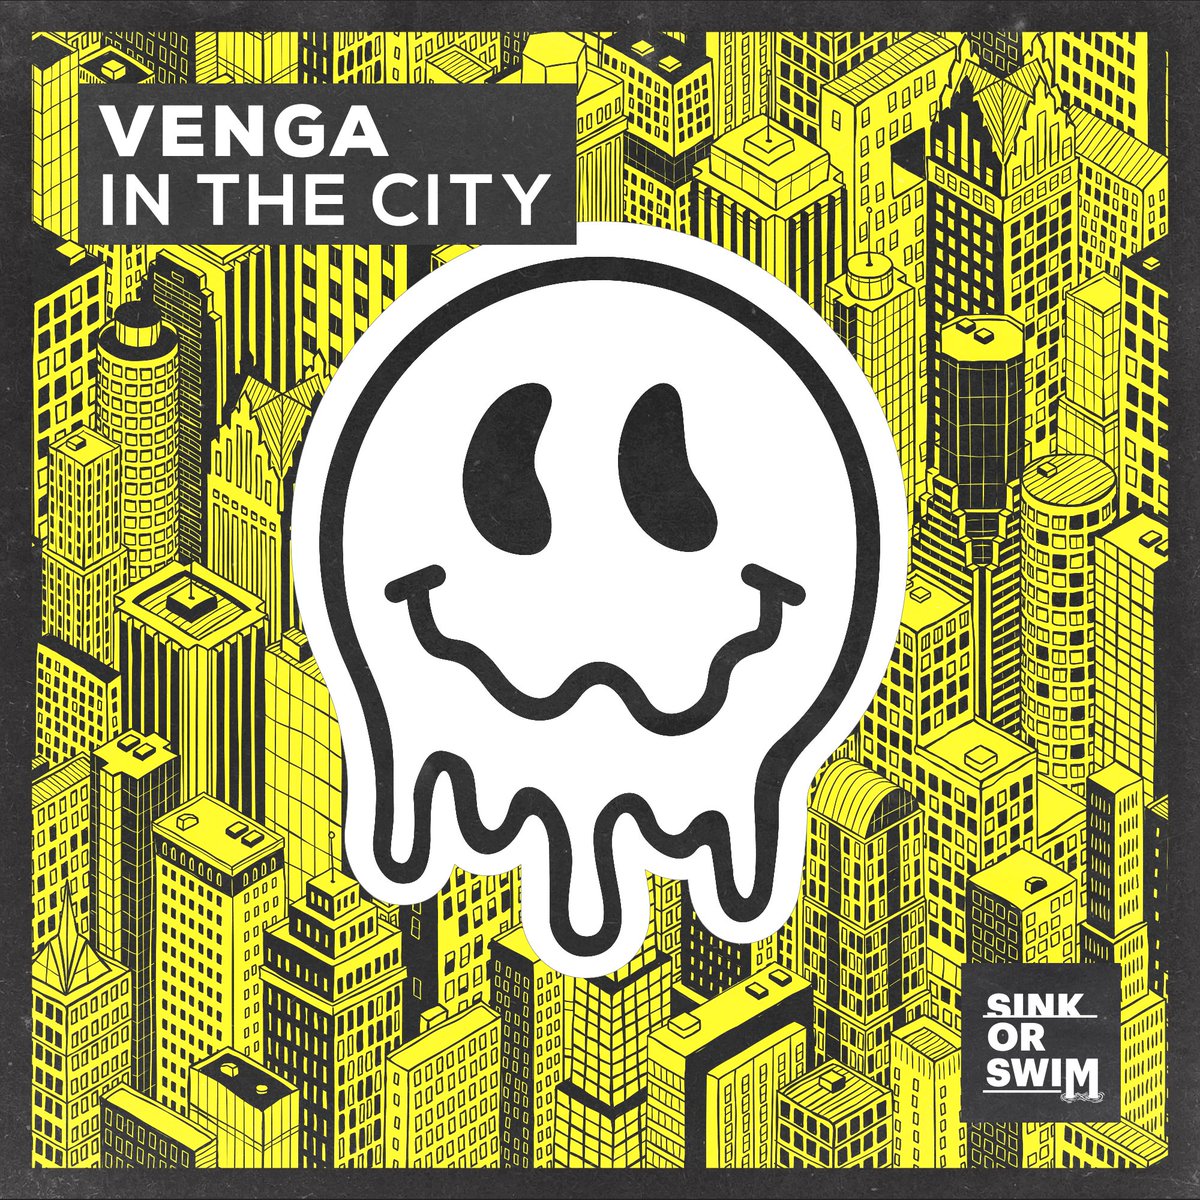 ‘In The City’ from VENGA features a hypnotizing acid undertone with tech house elements👌🏻 Supported by: Dom Dolla, Marten Horger, Malaa, Piero Pirupa, Wade, Black V Neck, Tiesto, Martin Garrix, Merk & Kremont, Sidney Samson, Bl3nd, R3wire, Zookeper, Julio Navas, Sikdope & Chuurch